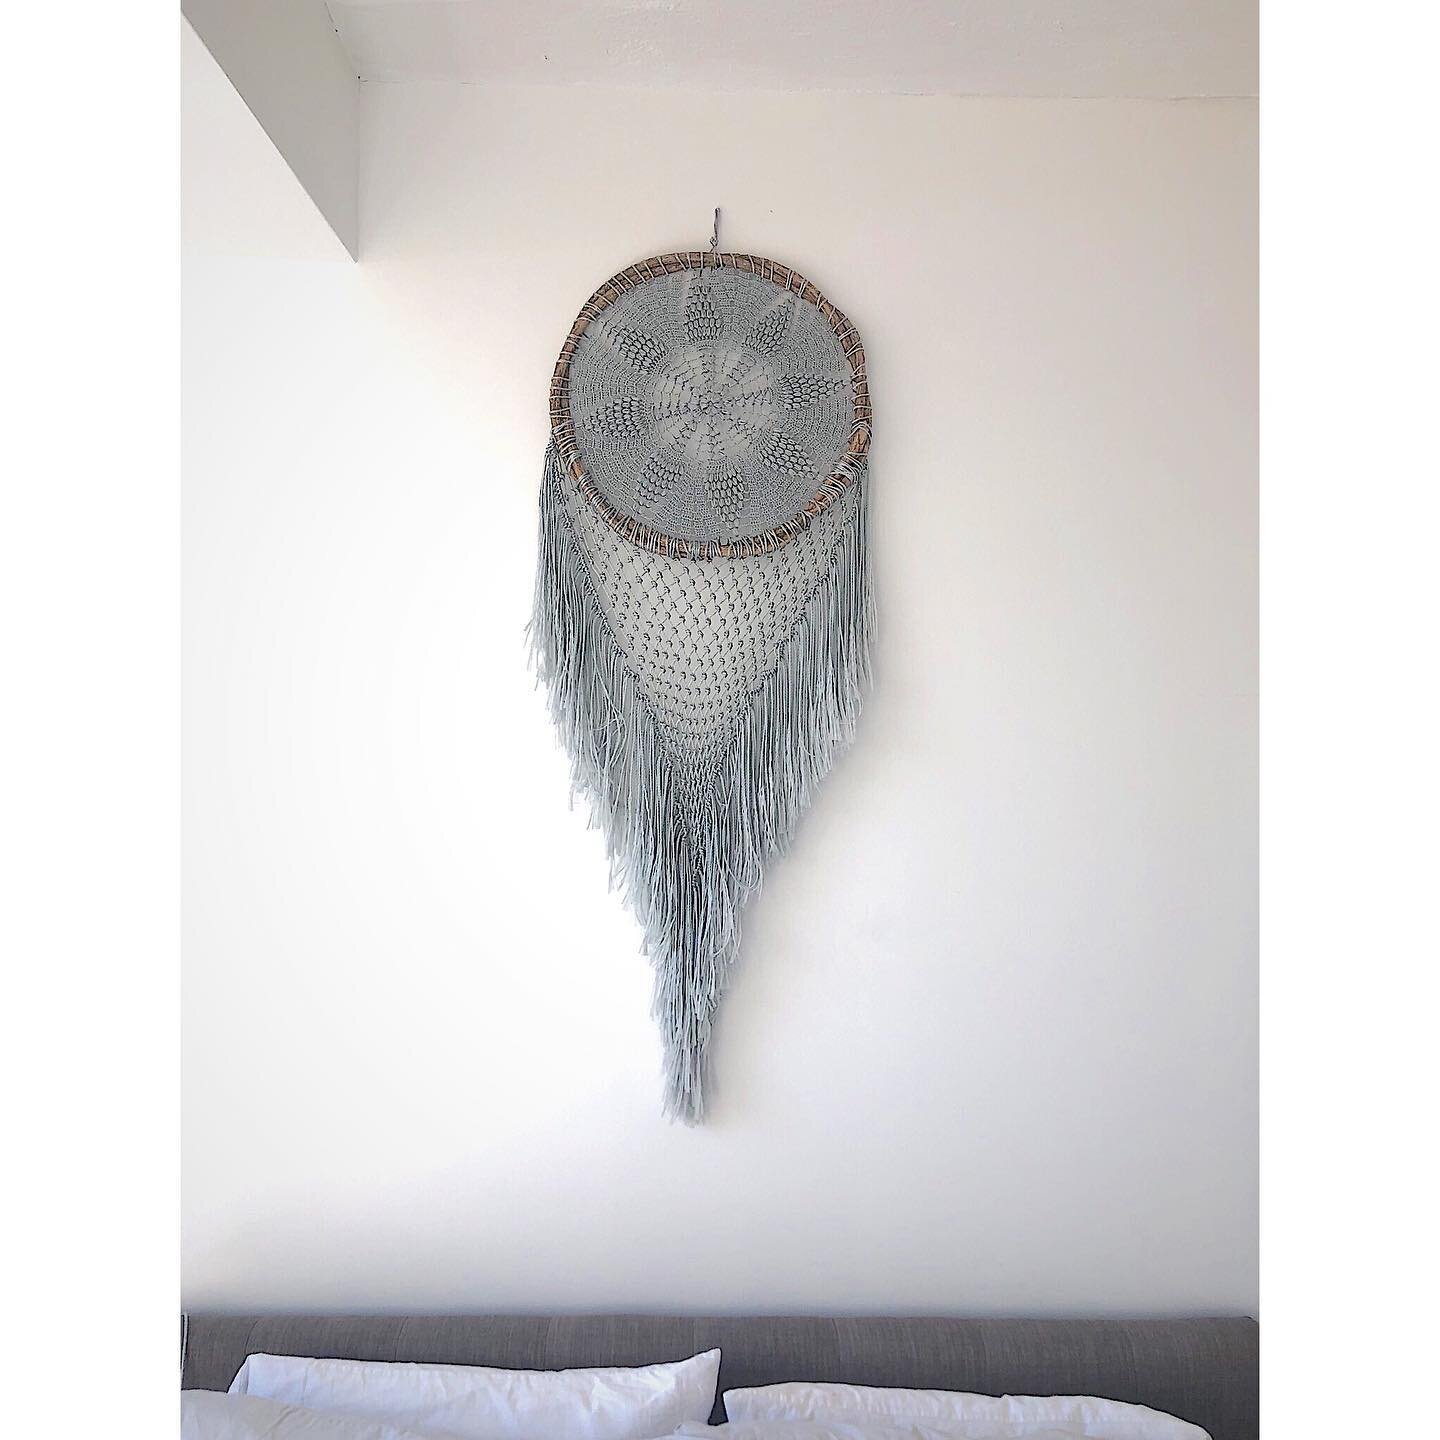 ▪️CALIFORNIA DREAMIN&rsquo;▪️
I&rsquo;m a dreamer. So a dream catcher has always been on my wish list. I never knew how expensive they could be. For the size I wanted, it was $250+ (holy crap, the mark-up)! I thought, I&rsquo;ll just keep dreamin&rsq